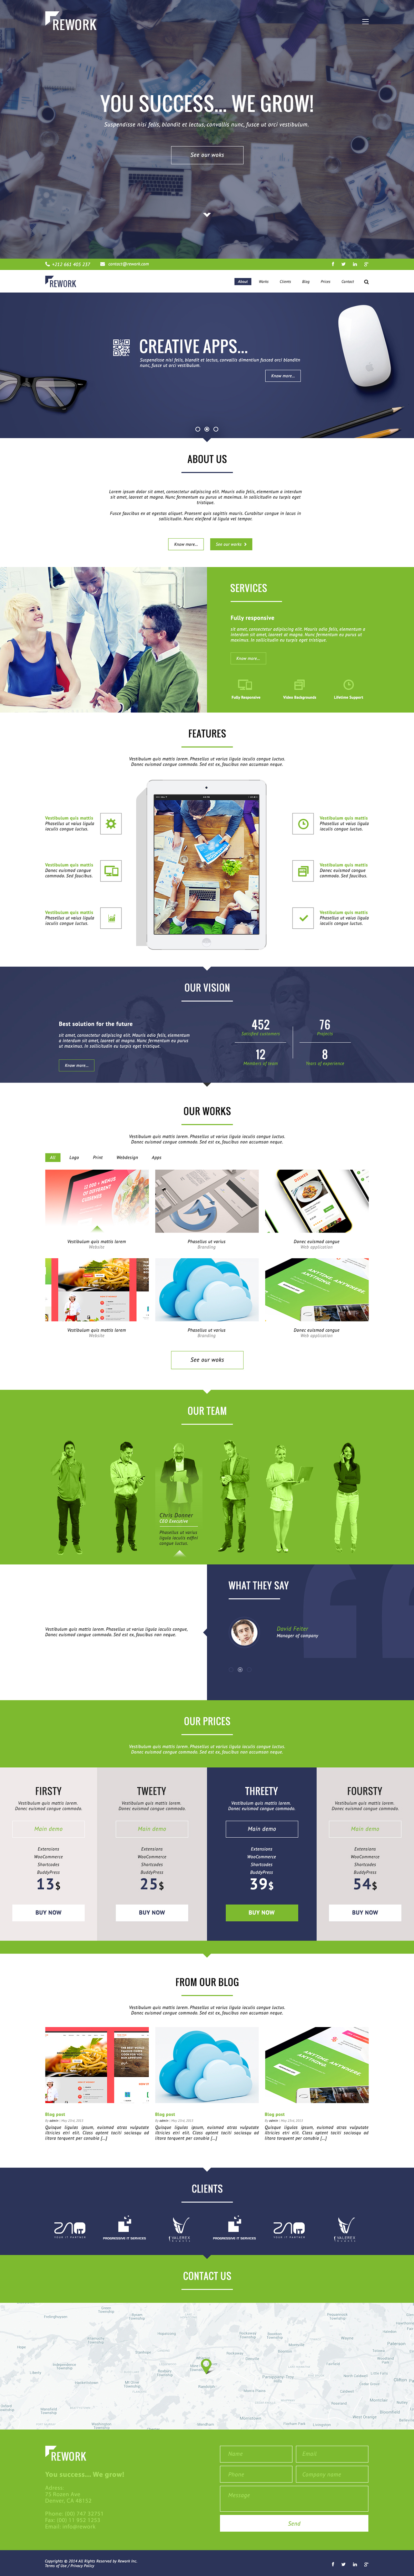 Webdesign ui design Theme landing page One Page modern corporate